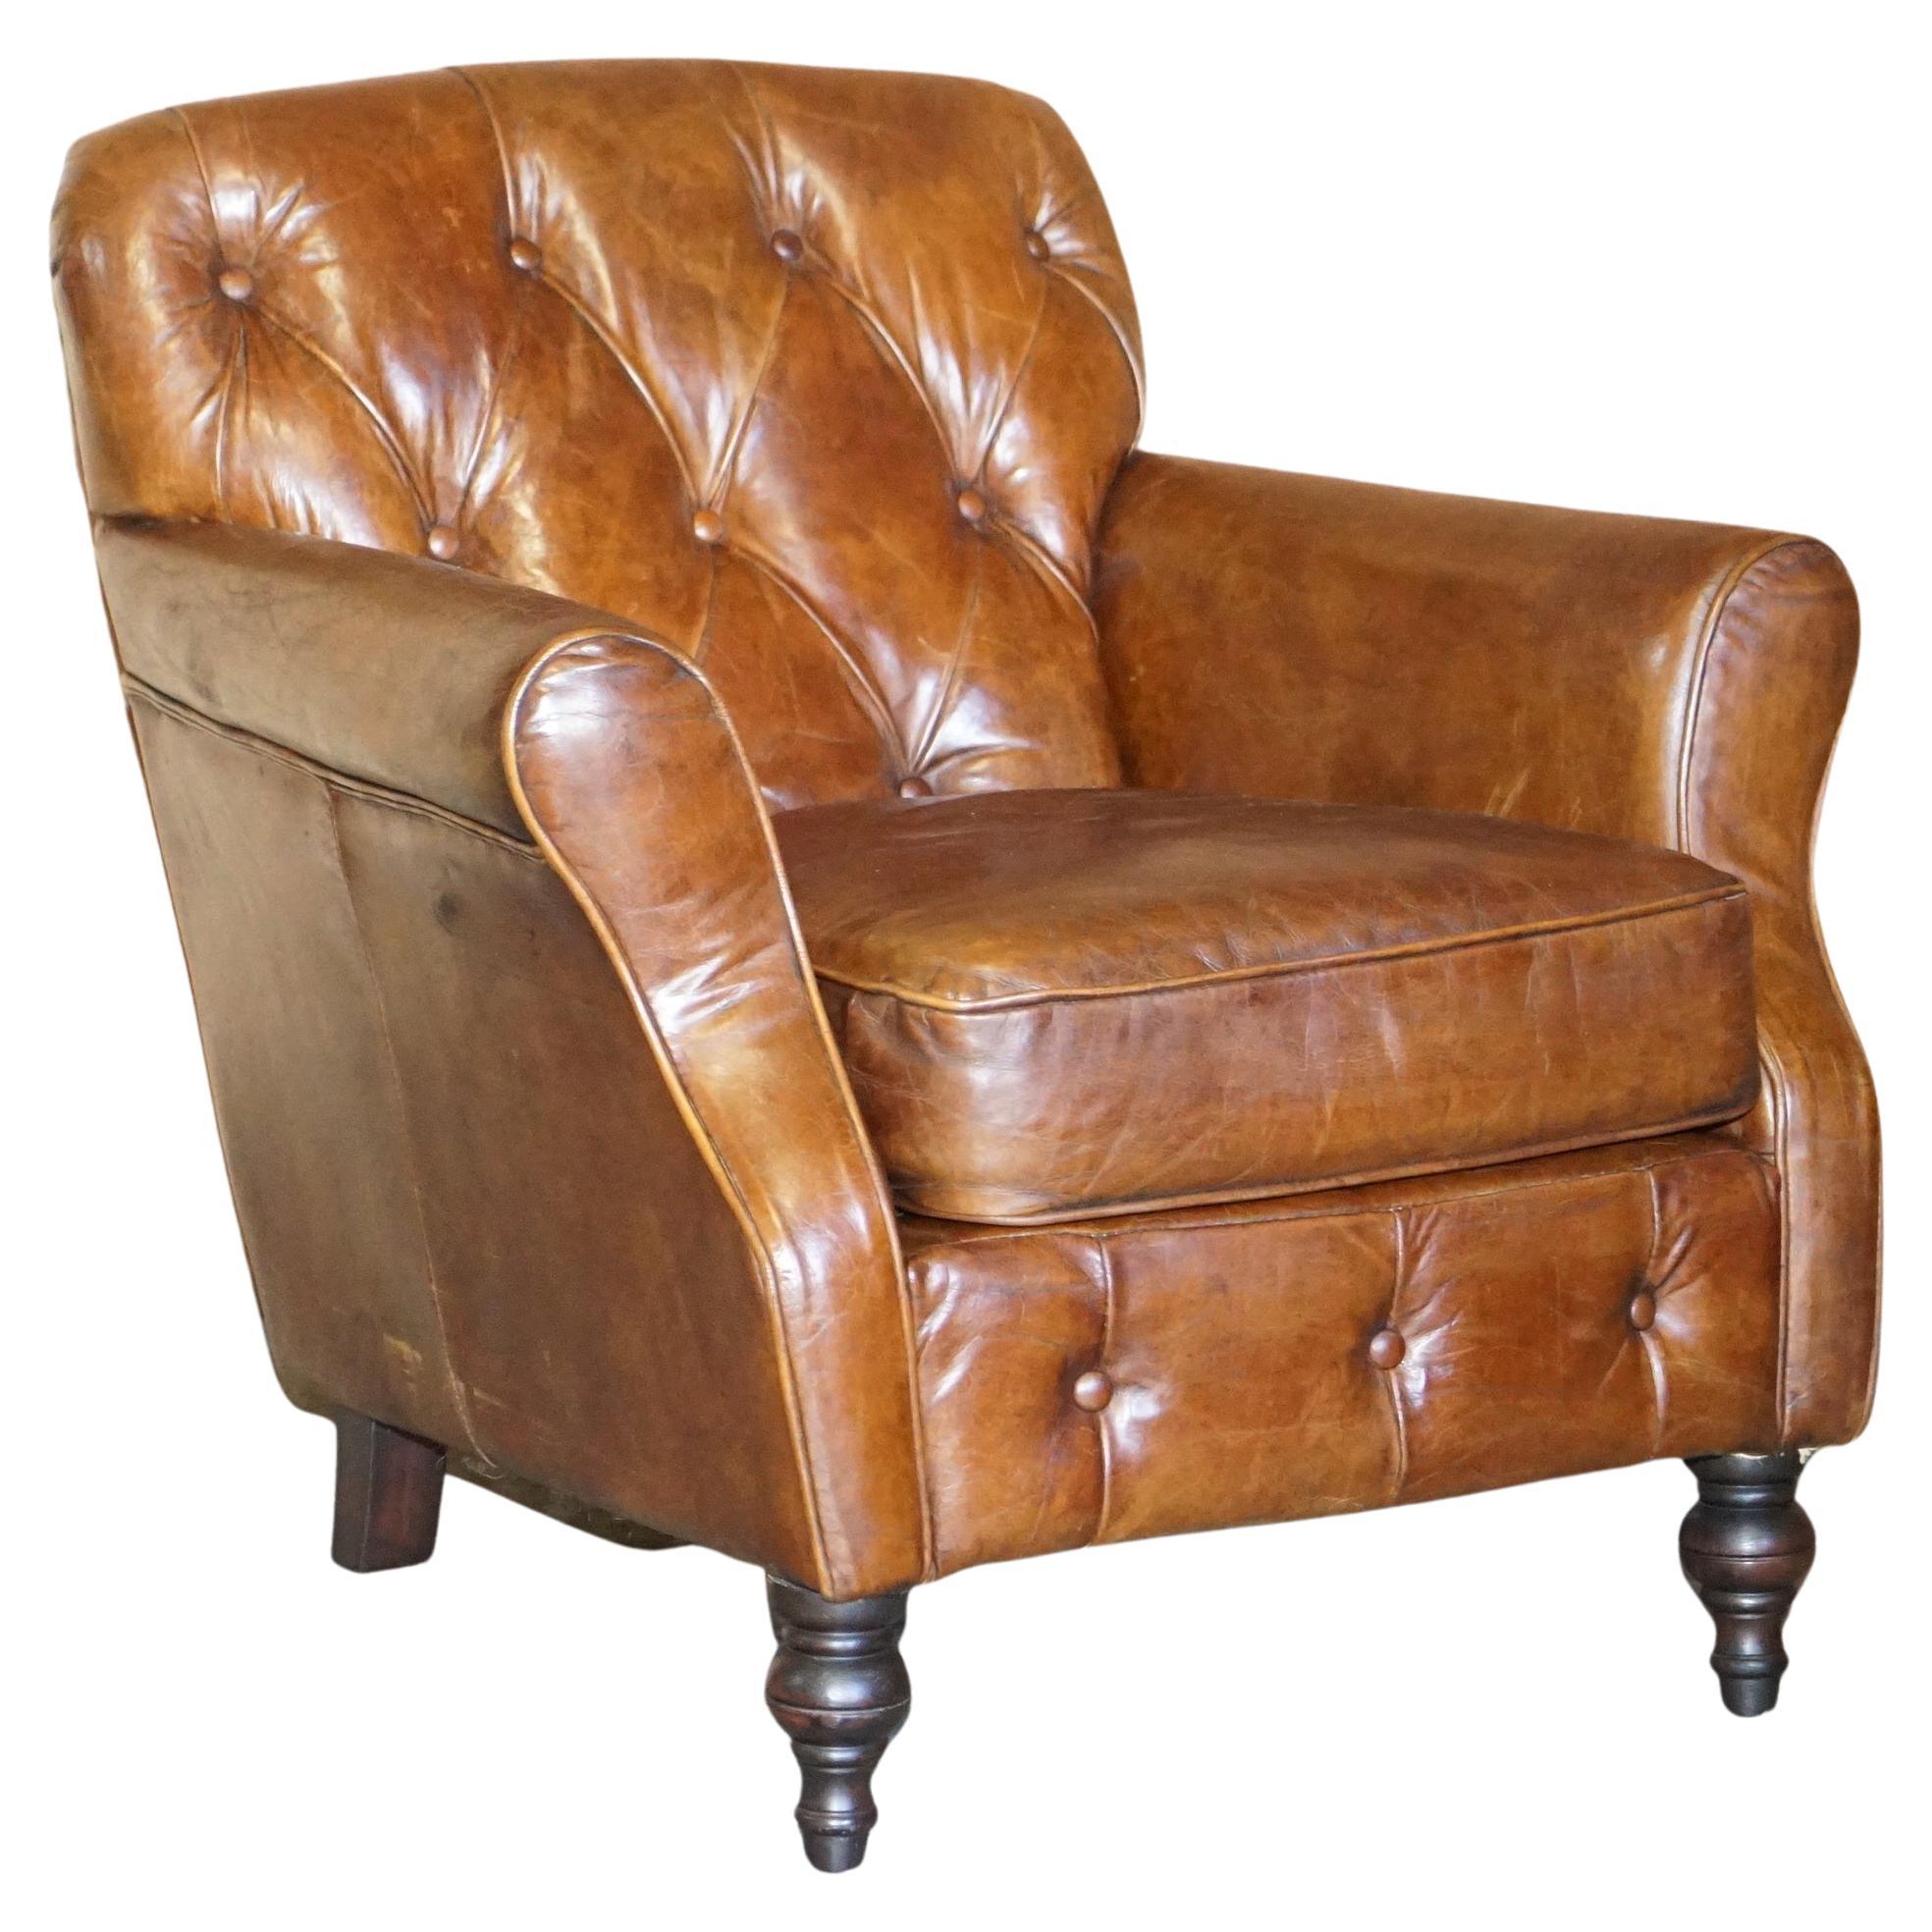 Vintage Heritage Aged Brown Leather Chesterfield Club Armchair Nice Tufting